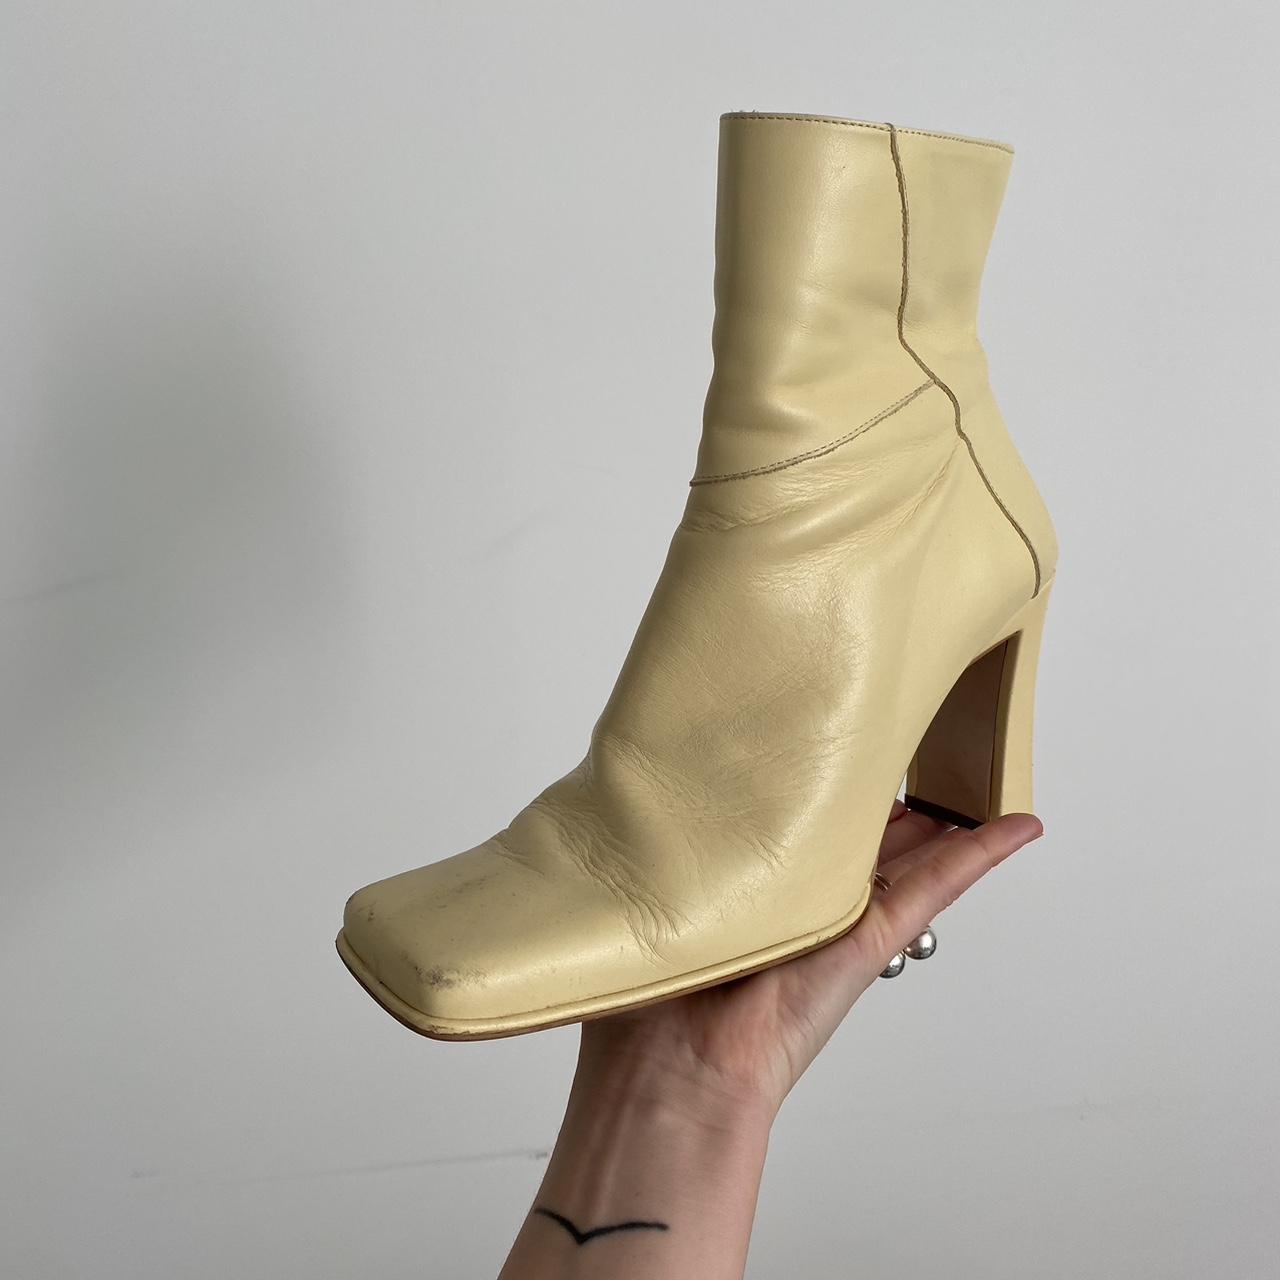 Mango boots in light yellow, worn but in good condition - Depop